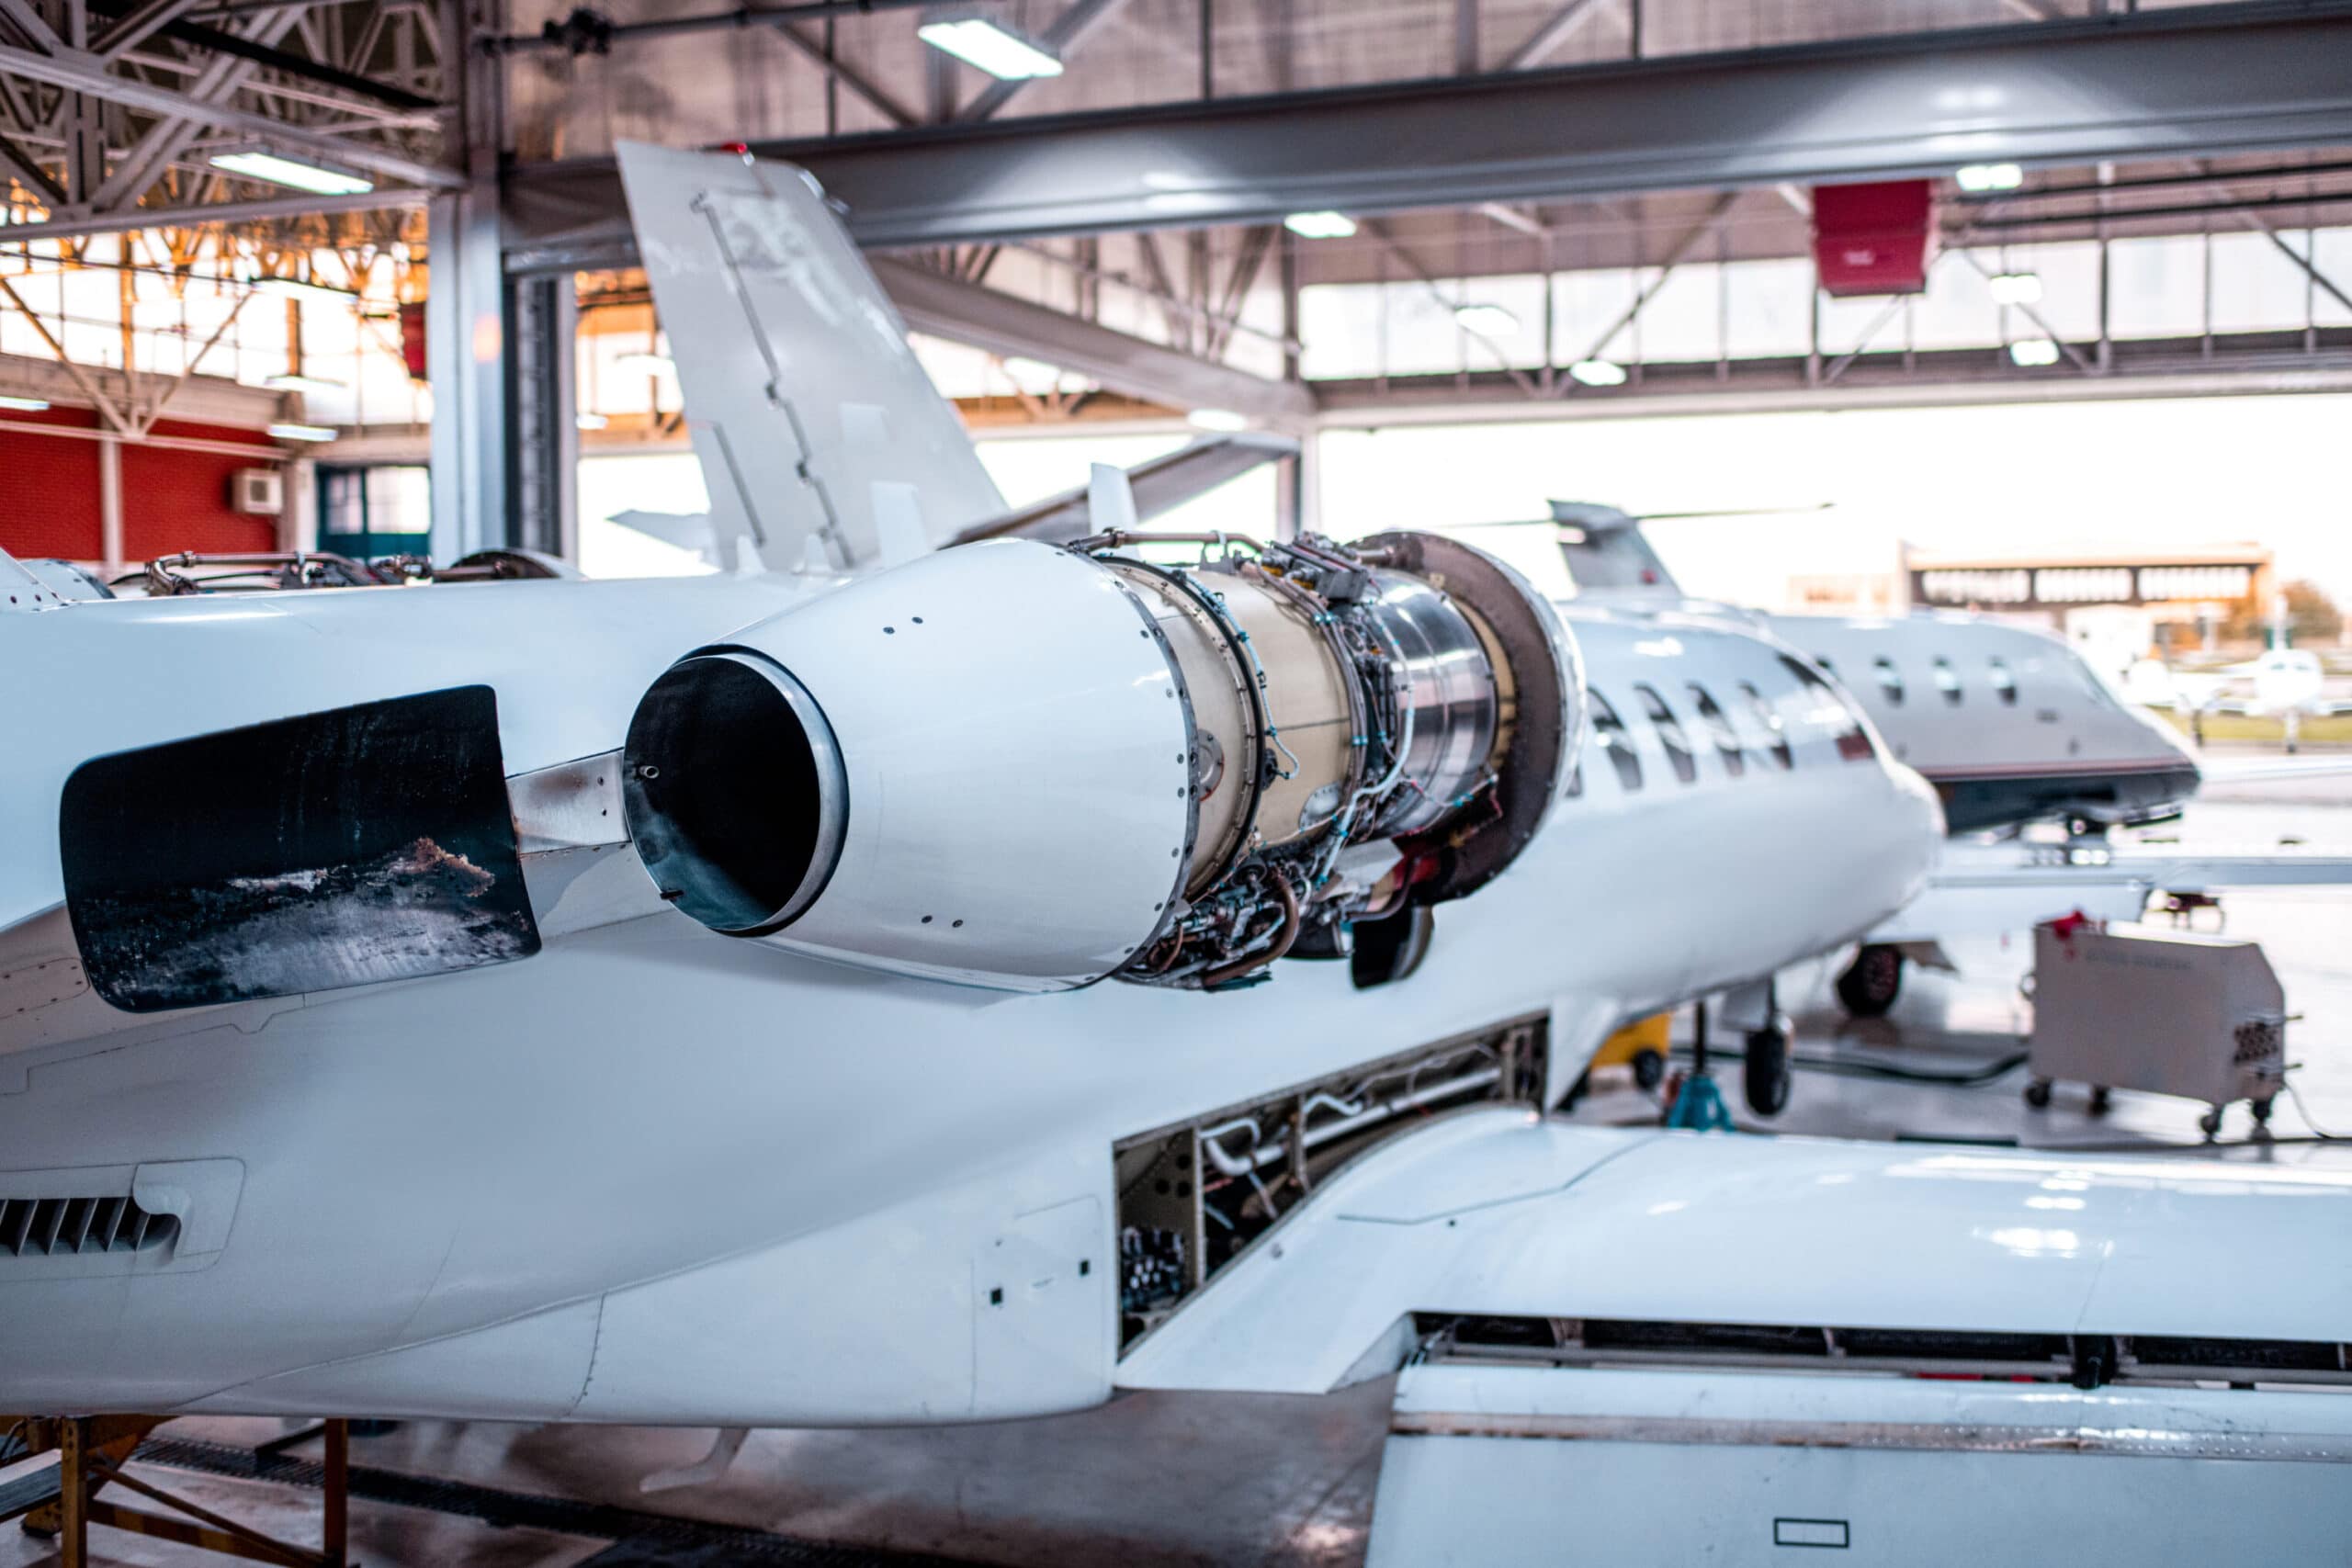 Citation Jet in hangar for maintenance with engine cover removed